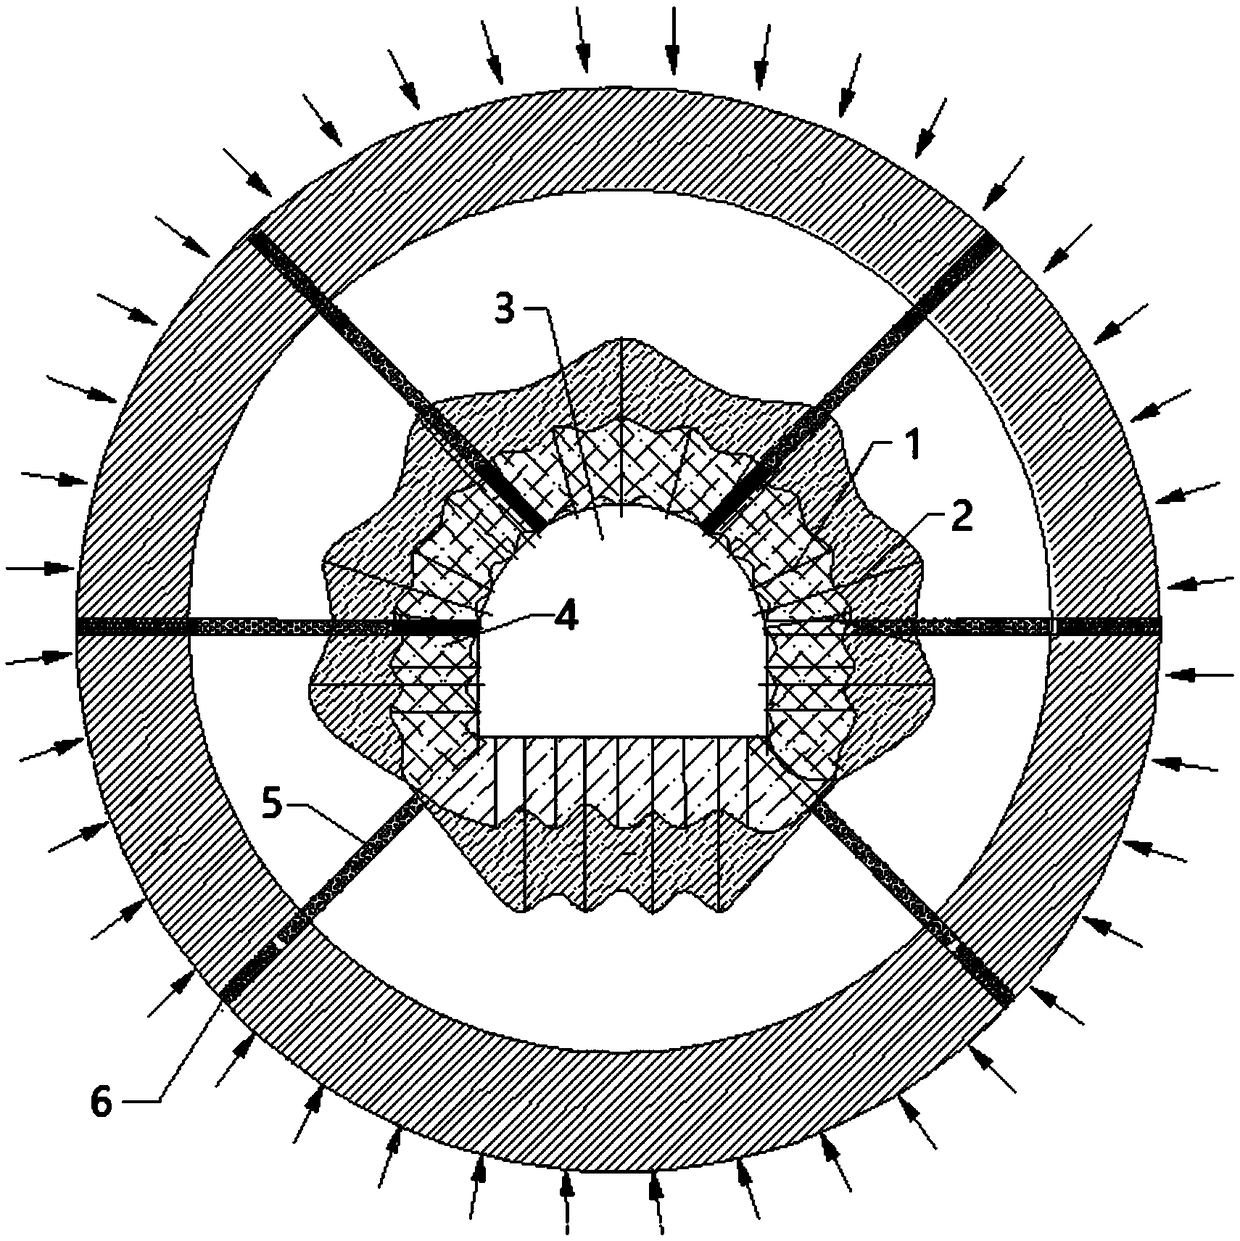 Timbering and pressure relief structure and method for rock burst tunnel